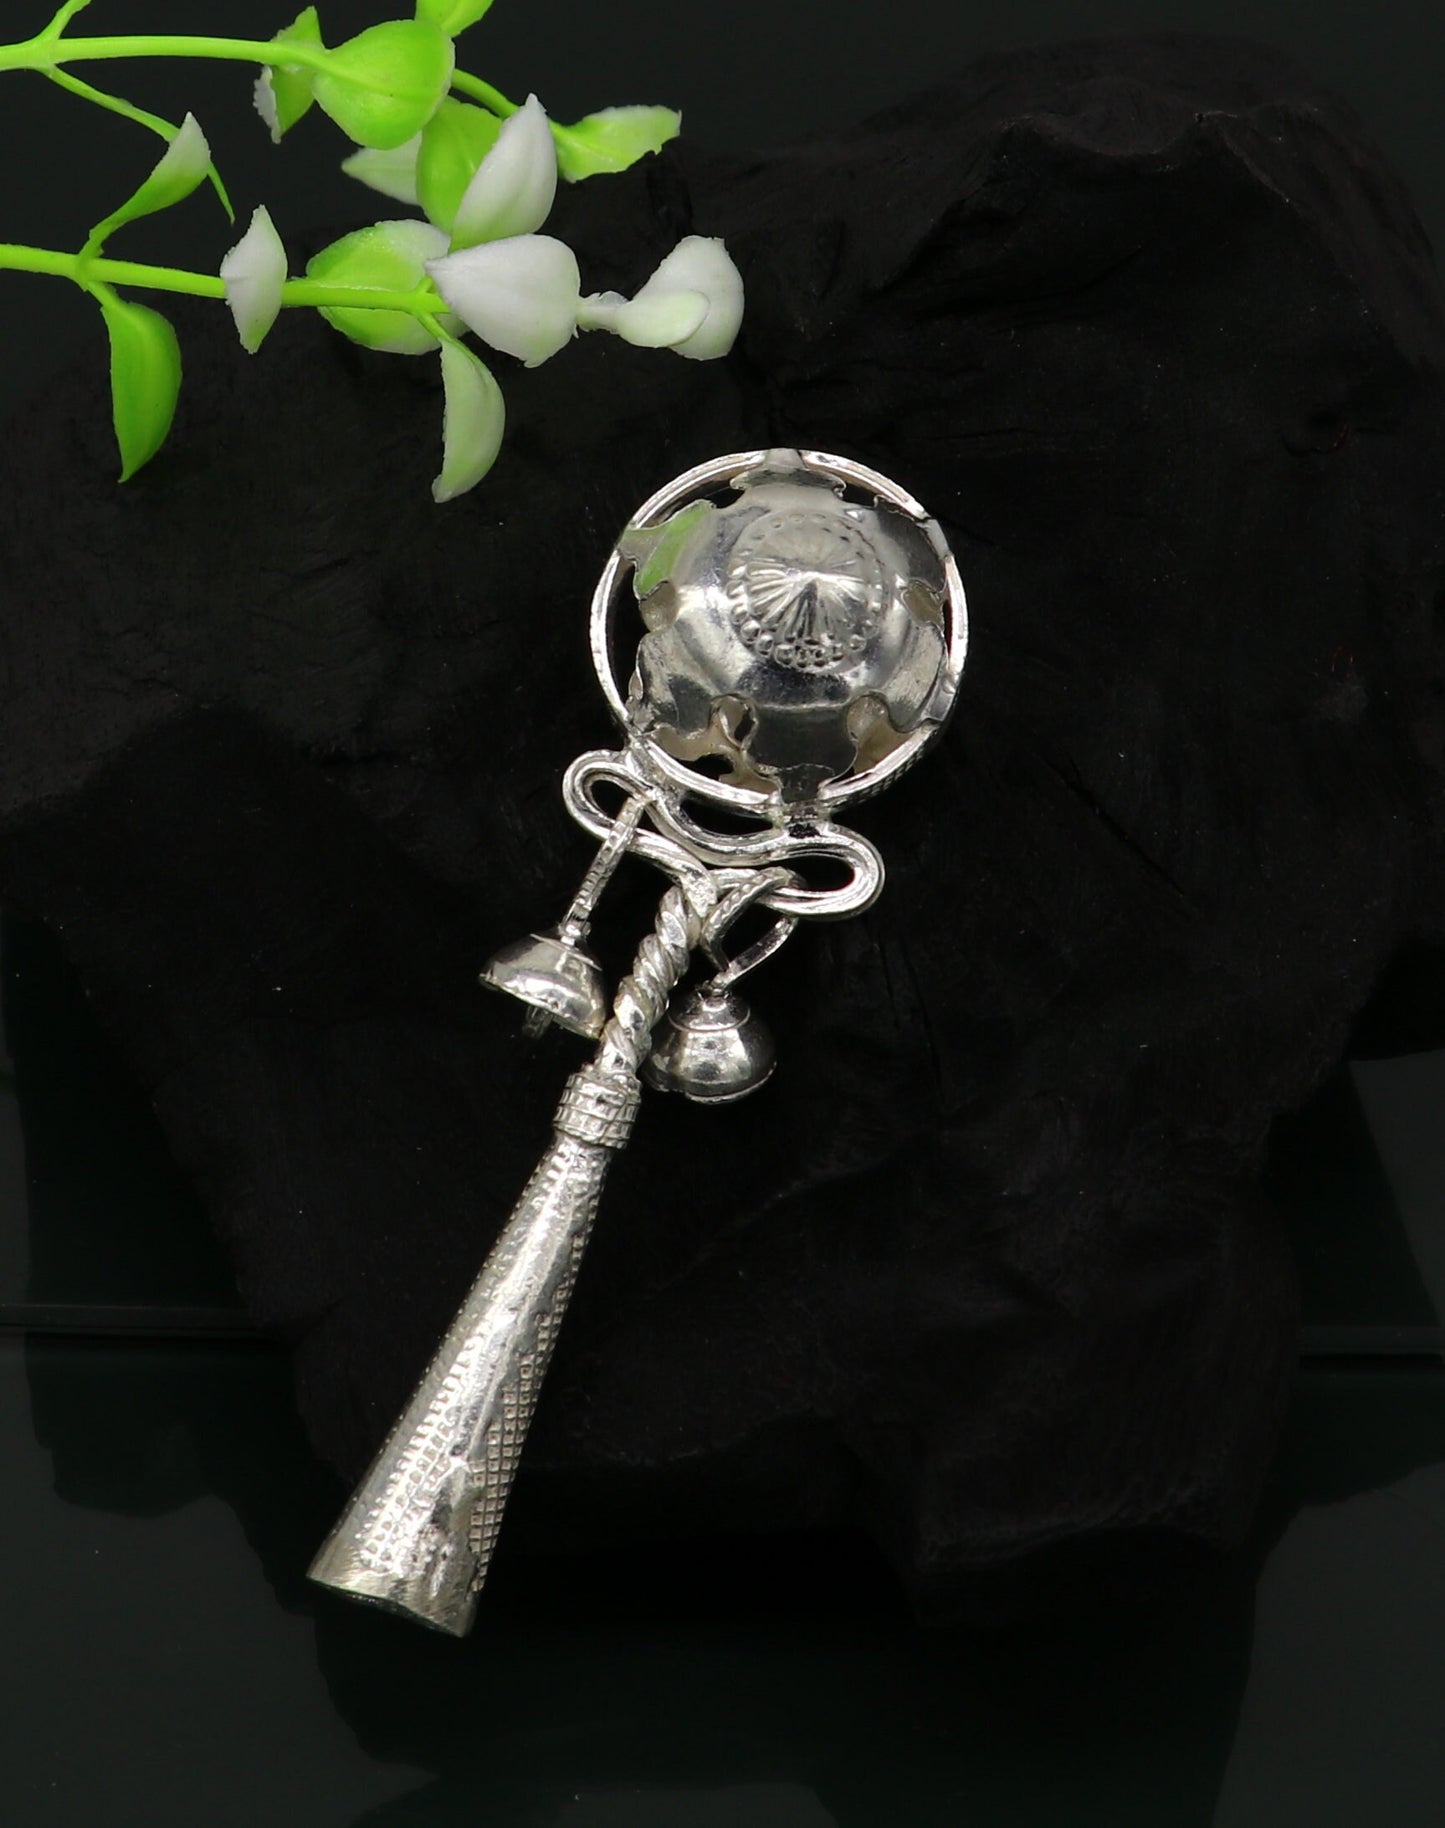 Solid sterling silver handmade design new born baby gifting bells toy, baby krishna gifting toy, silver whistle, silver temple article su192 - TRIBAL ORNAMENTS